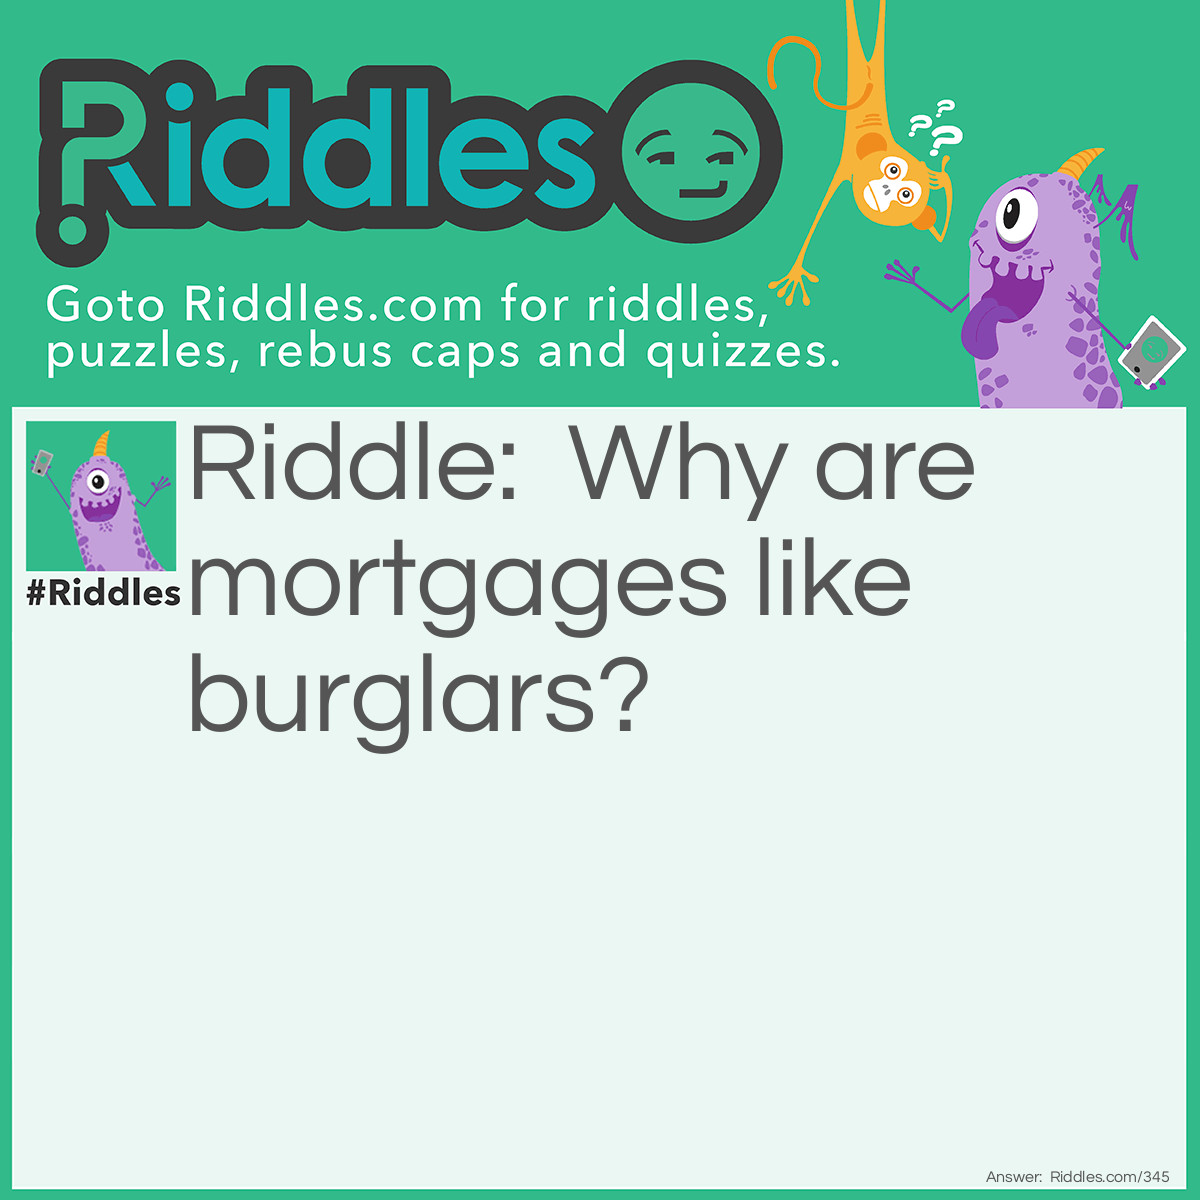 Riddle: Why are mortgages like burglars? Answer: They secure (seek your) money.